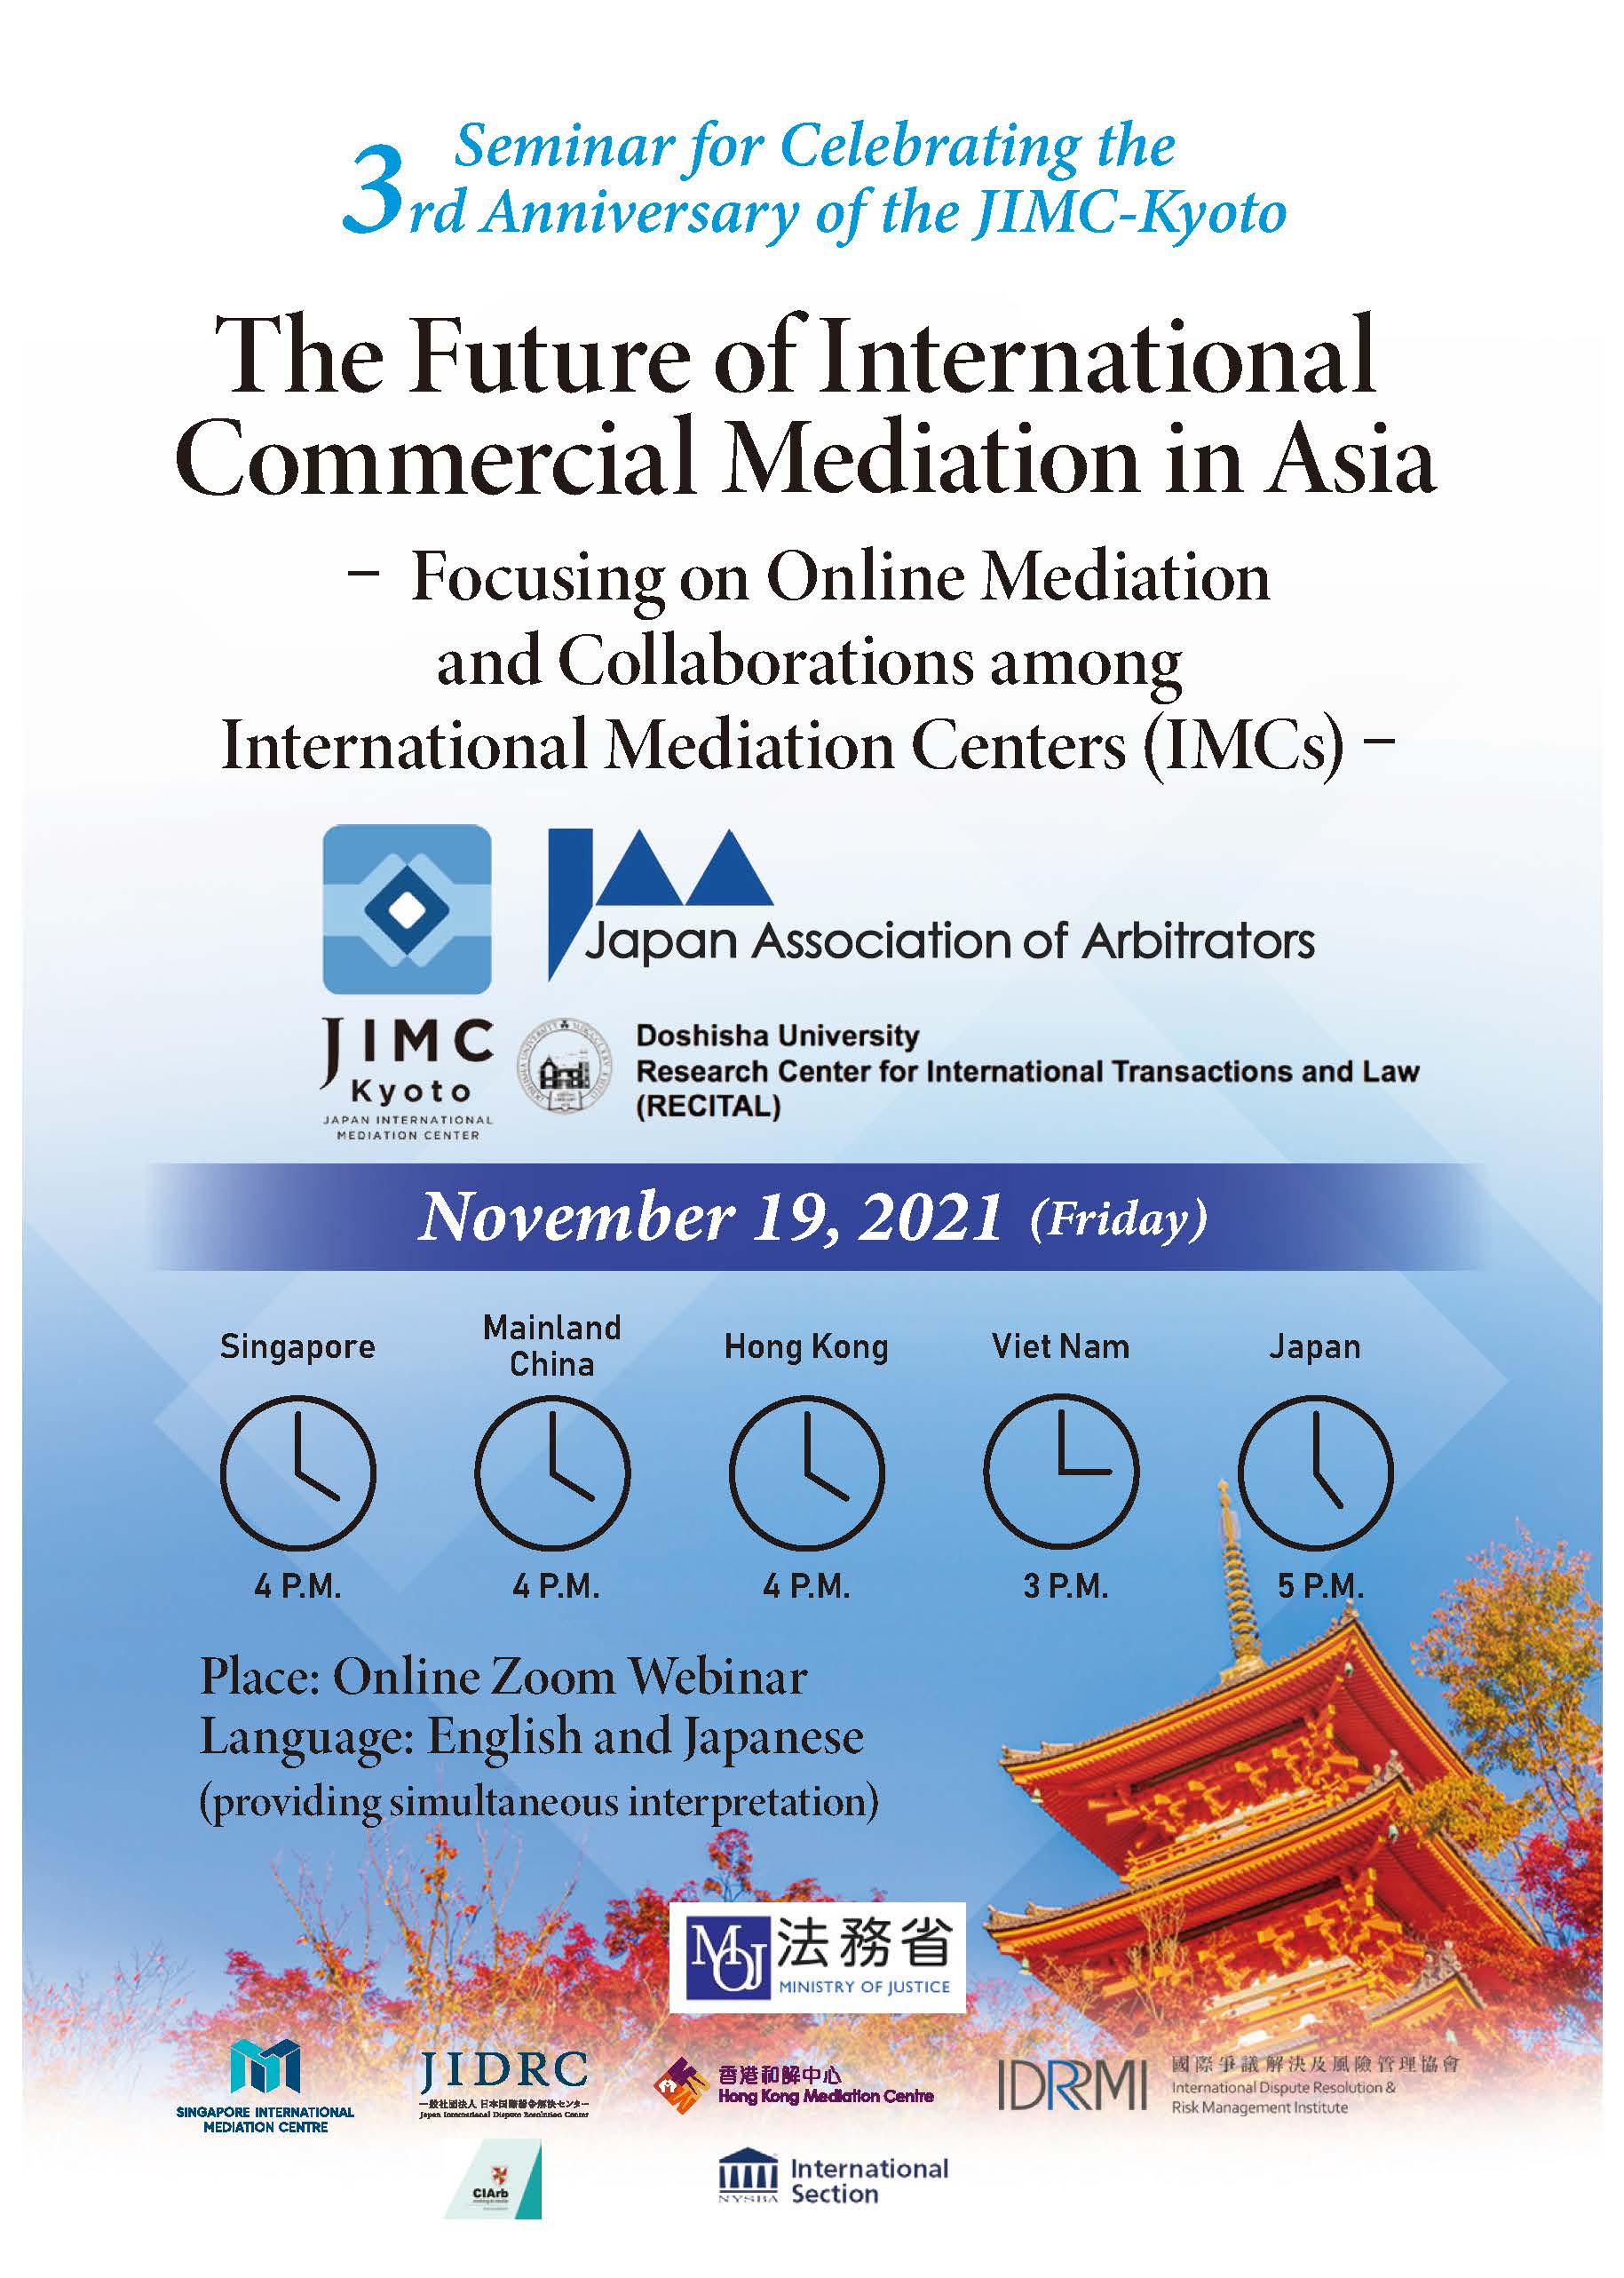 The-Future-of-International-Commercial-Mediation-in-Asia_20211106-1_%E9%A1%B5%E9%9D%A2_1-1.jpg